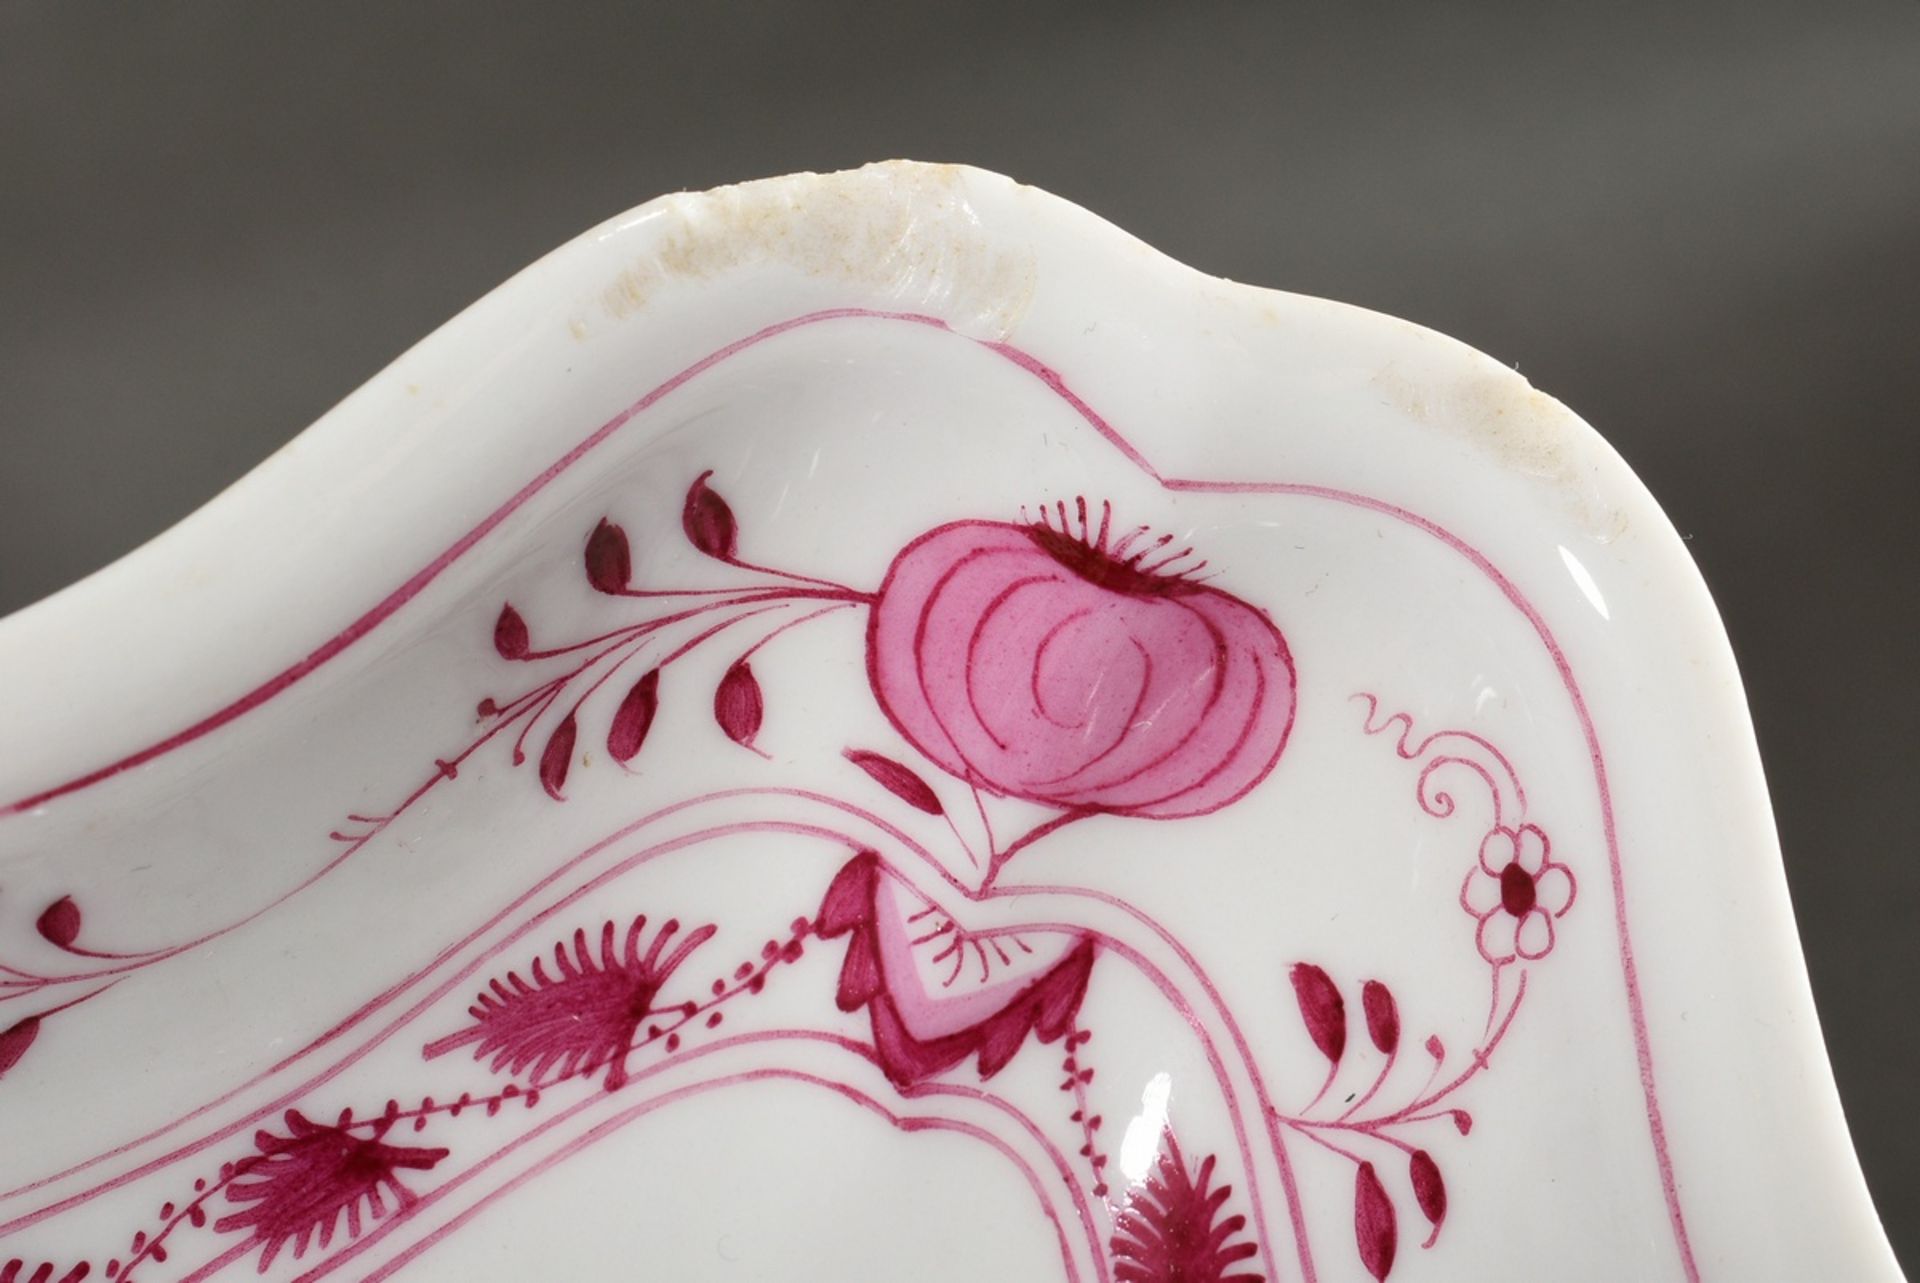 65 Pieces rare Meissen dinner service "Zwiebelmuster Pink", custom made around 1900, consisting of: - Image 23 of 27